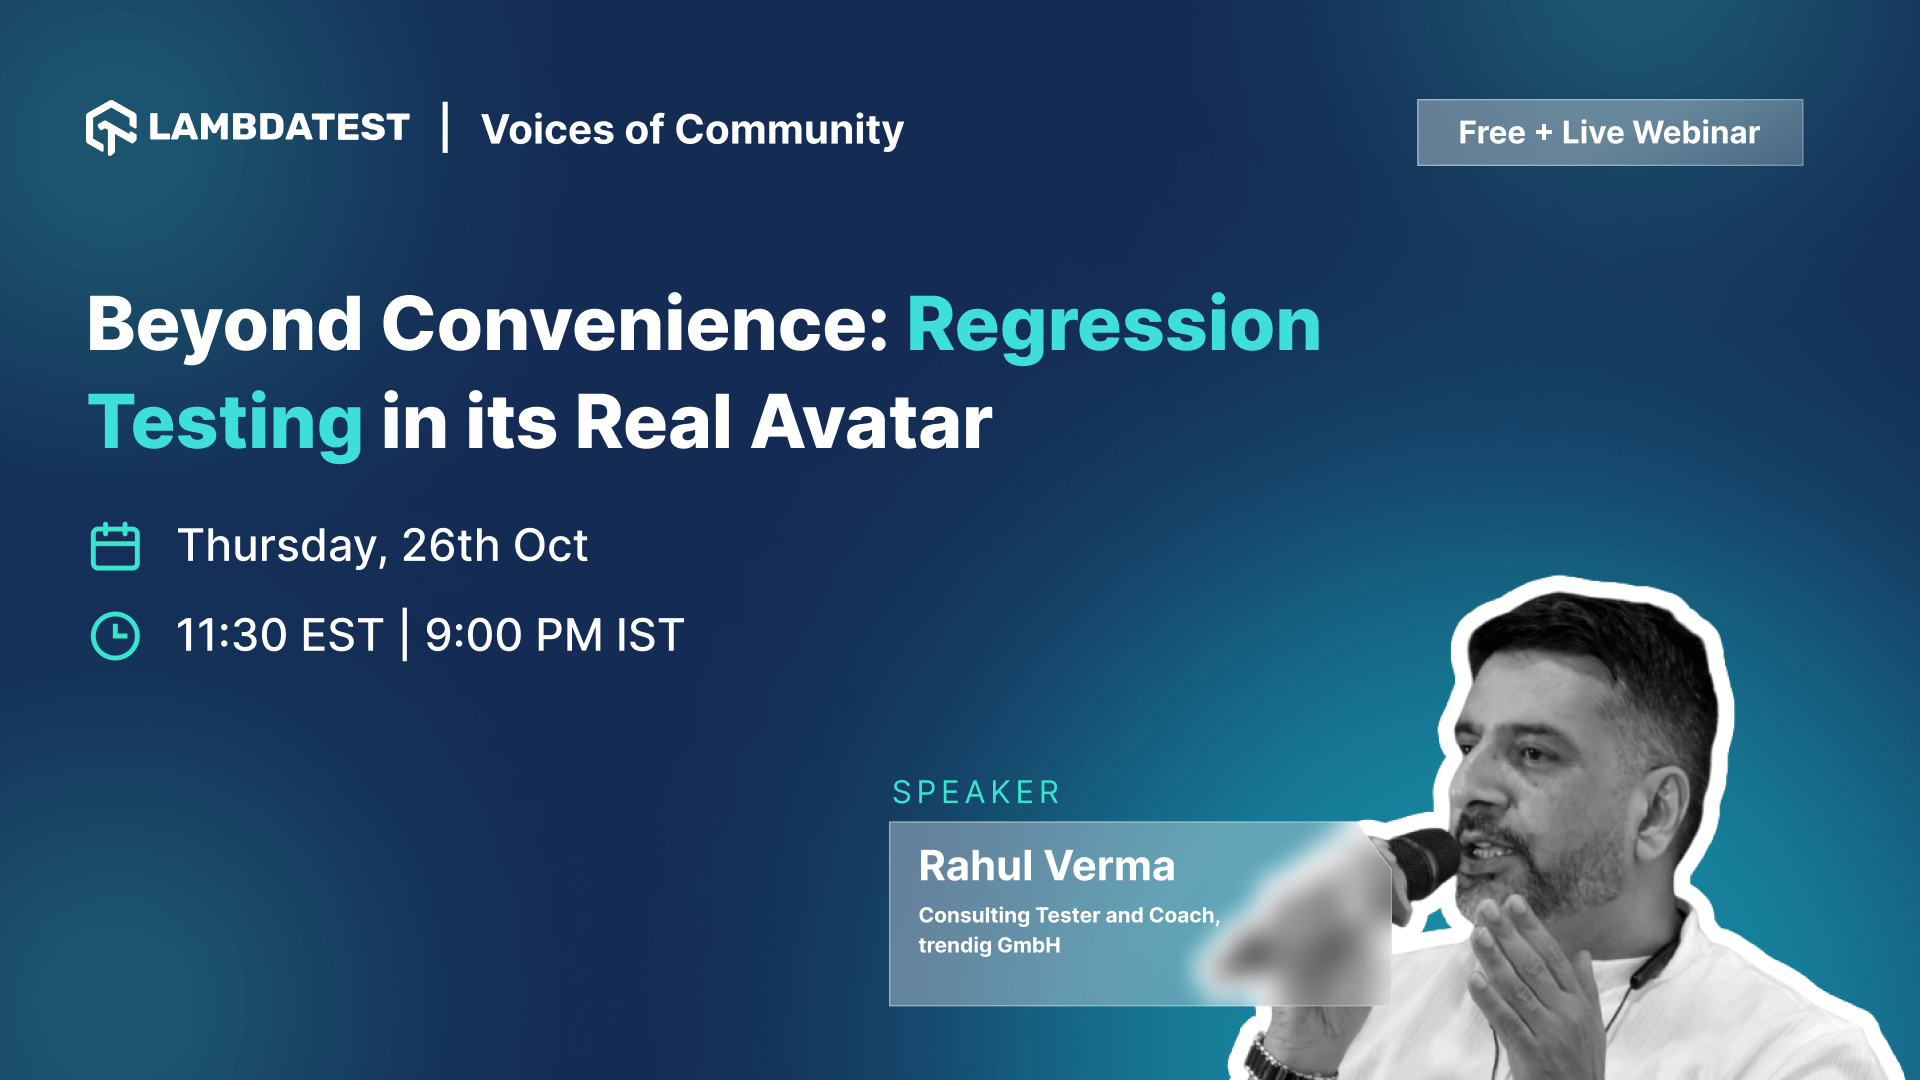 Beyond Convenience: Regression Testing in its Real Avatar